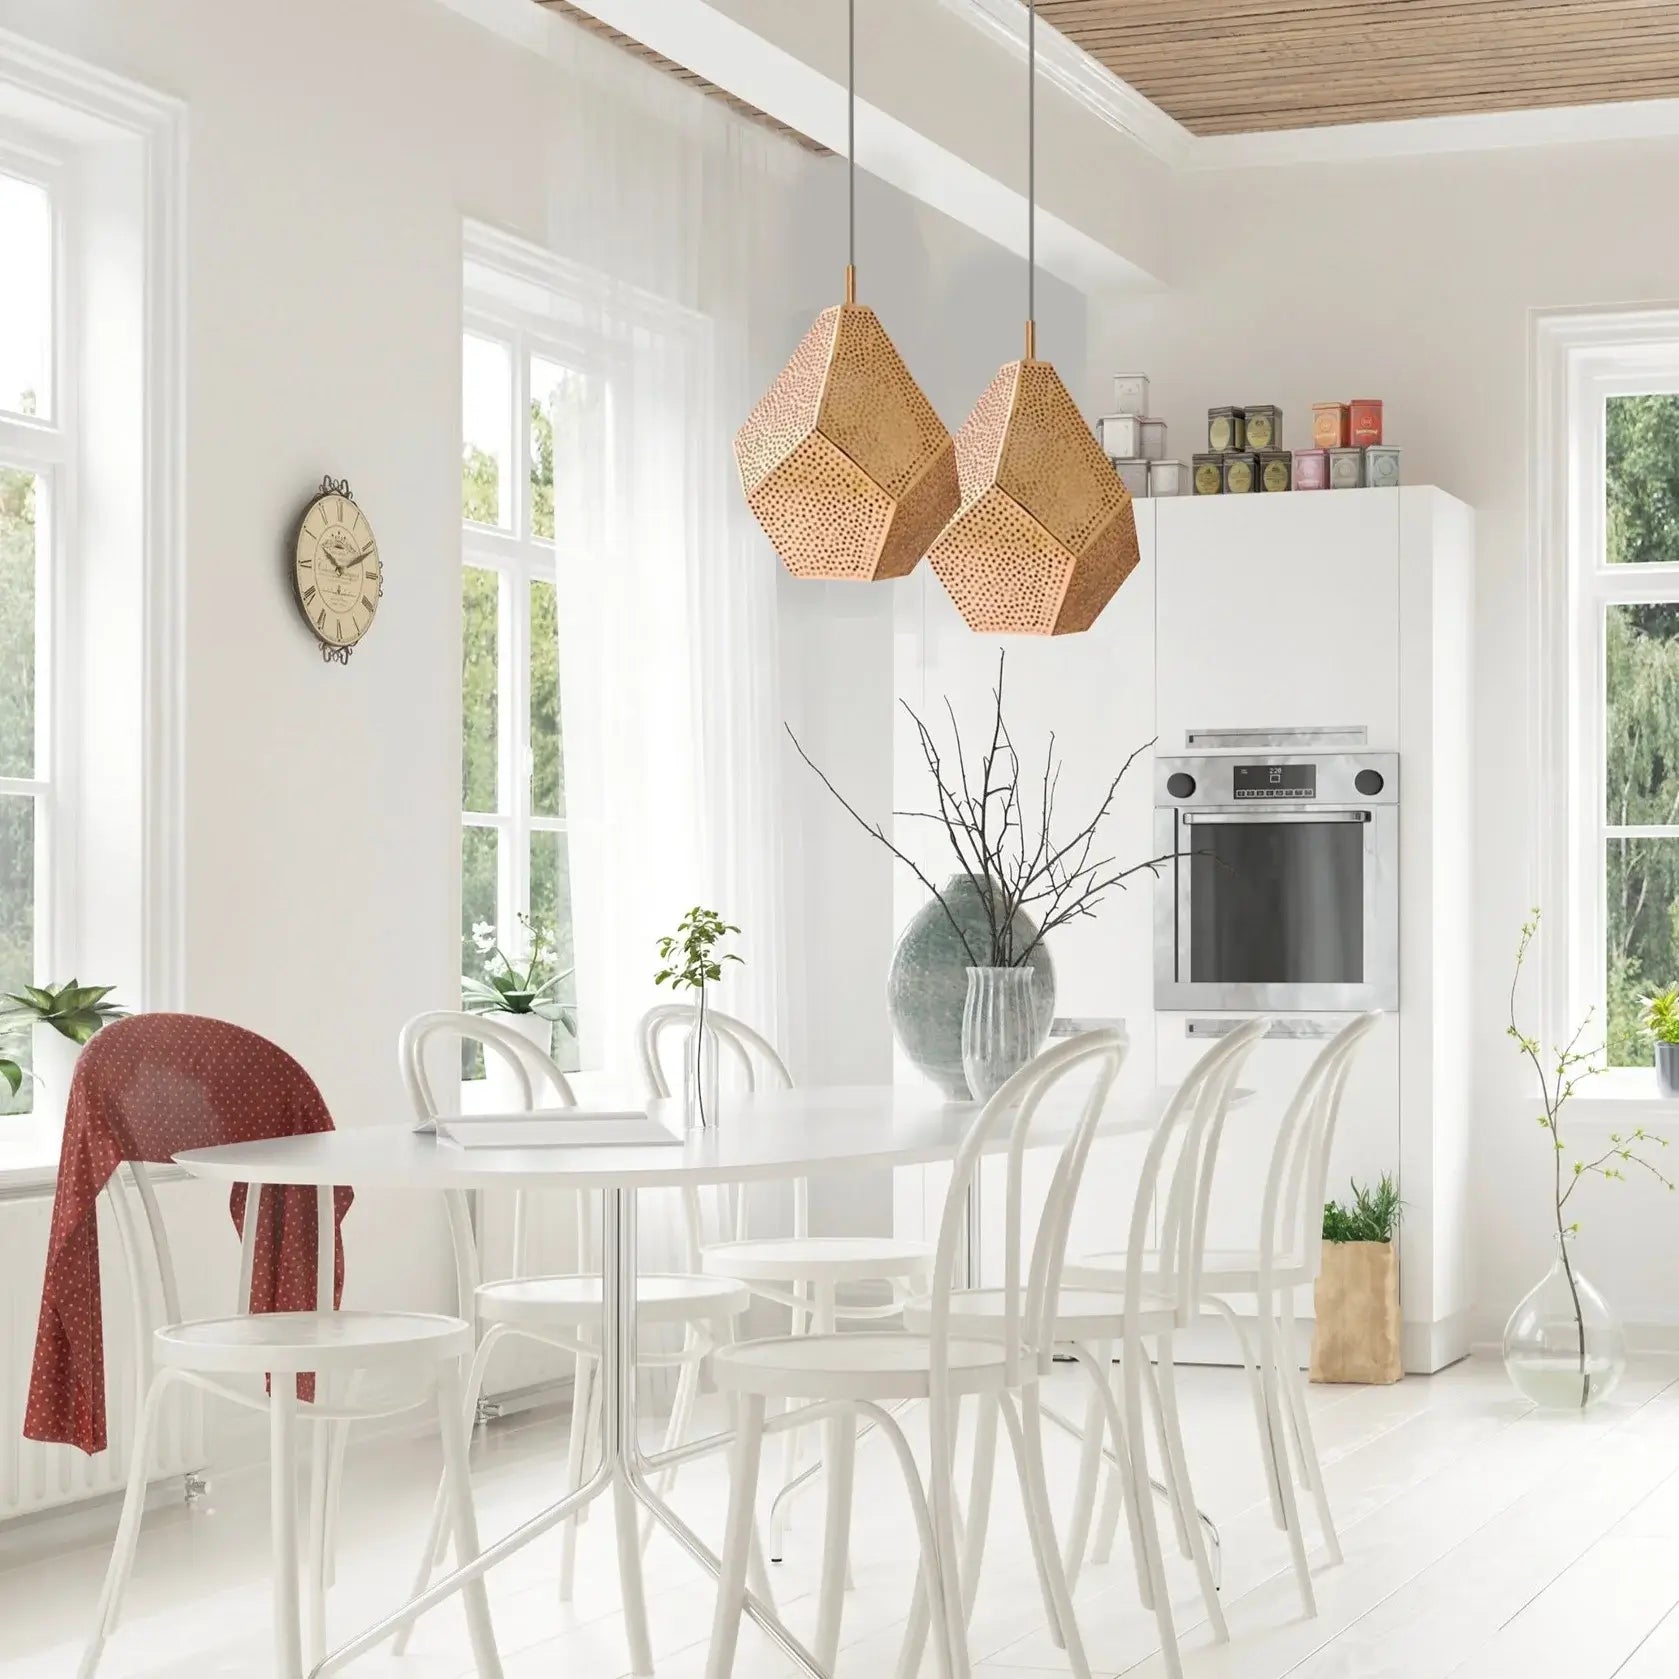 Dounia home Pendant light in Polished Copper made of metal, used as a dining room lighting, Model: Almas